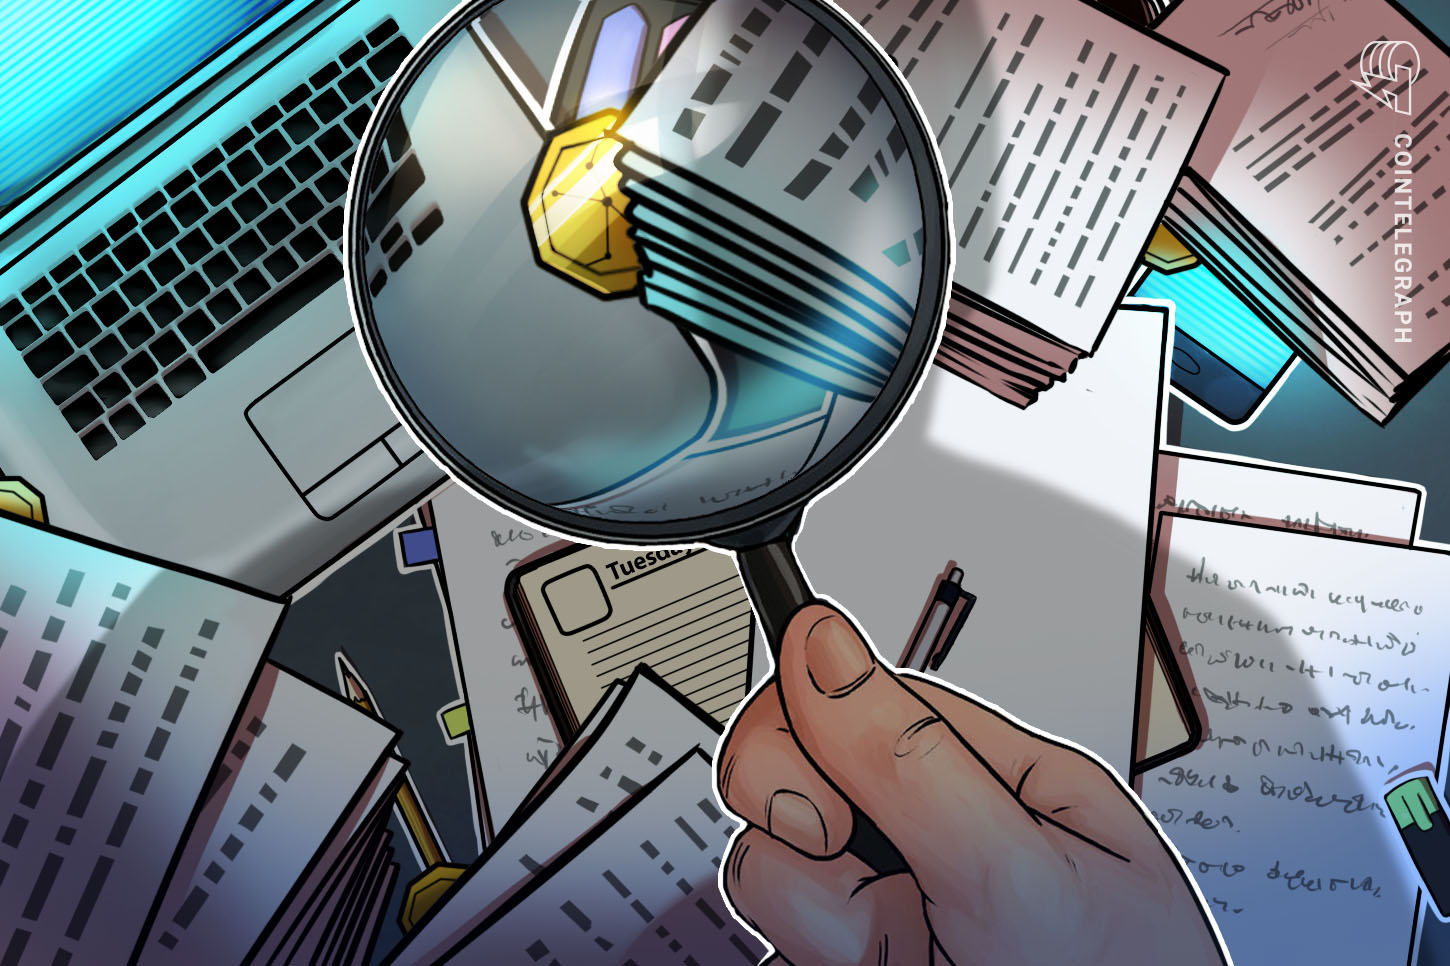 Stablecoin issuer Paxos reportedly probed by New York regulators